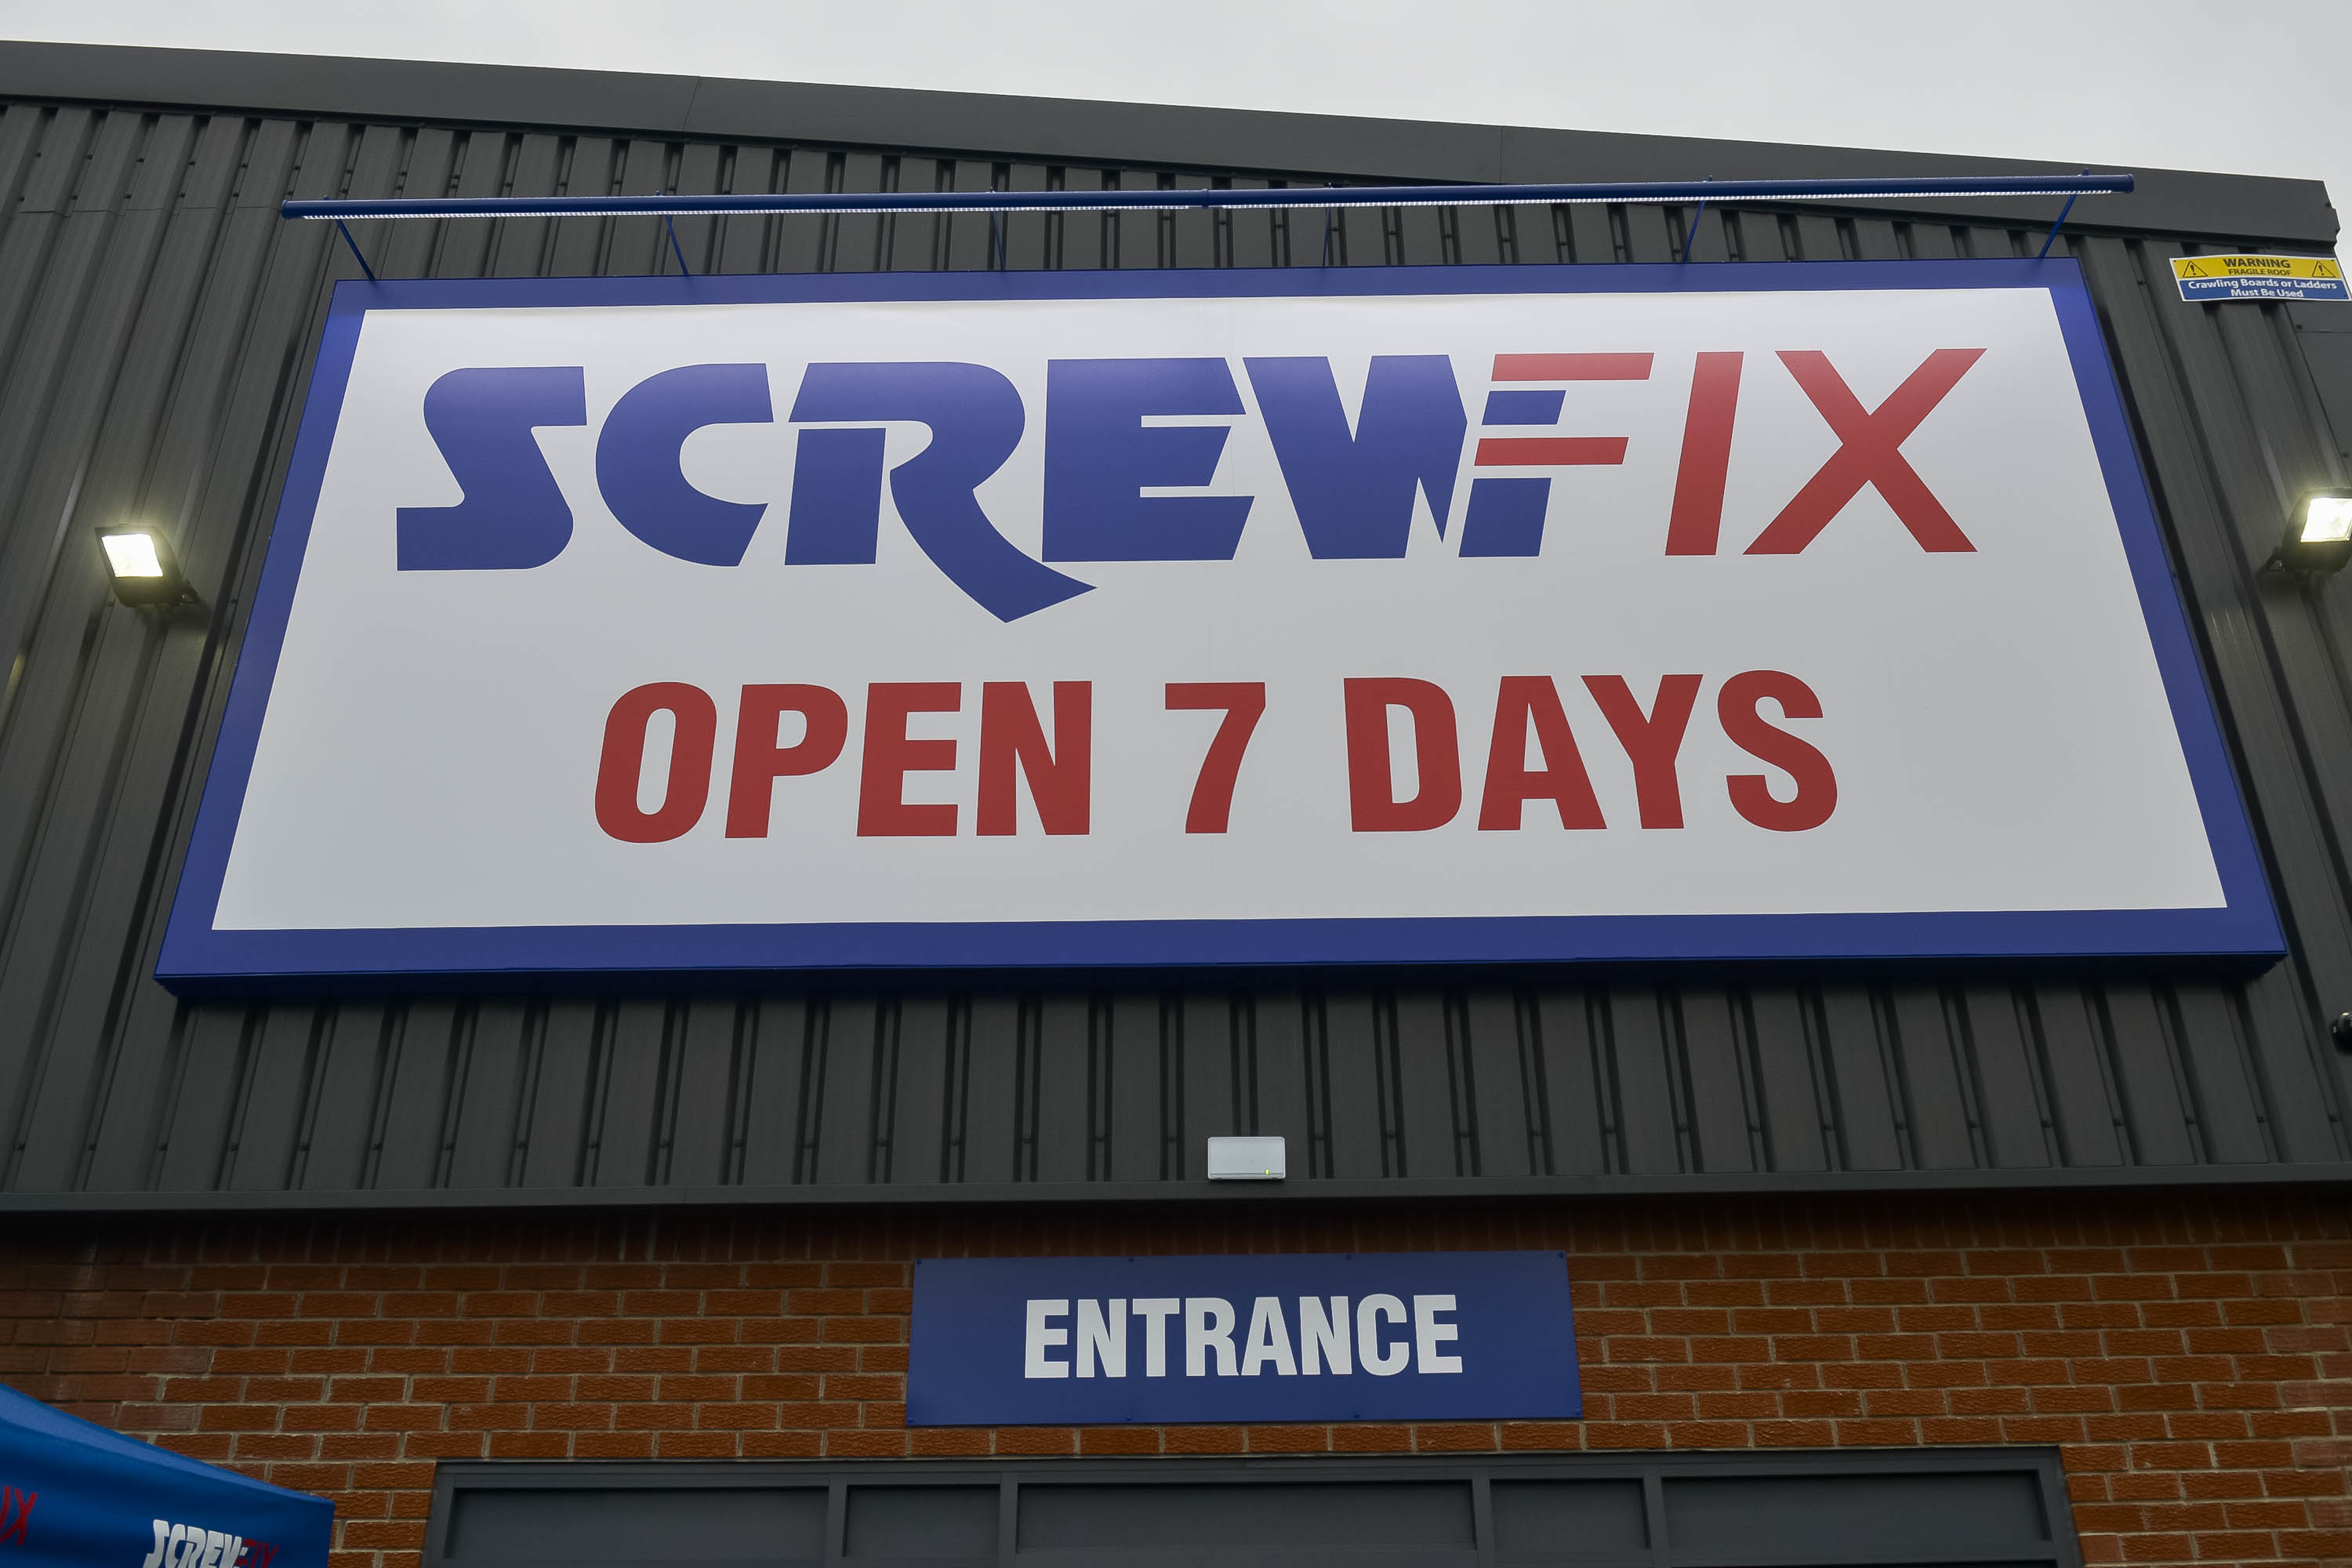 Abertillery – Aberbeeg to welcome new Screwfix store